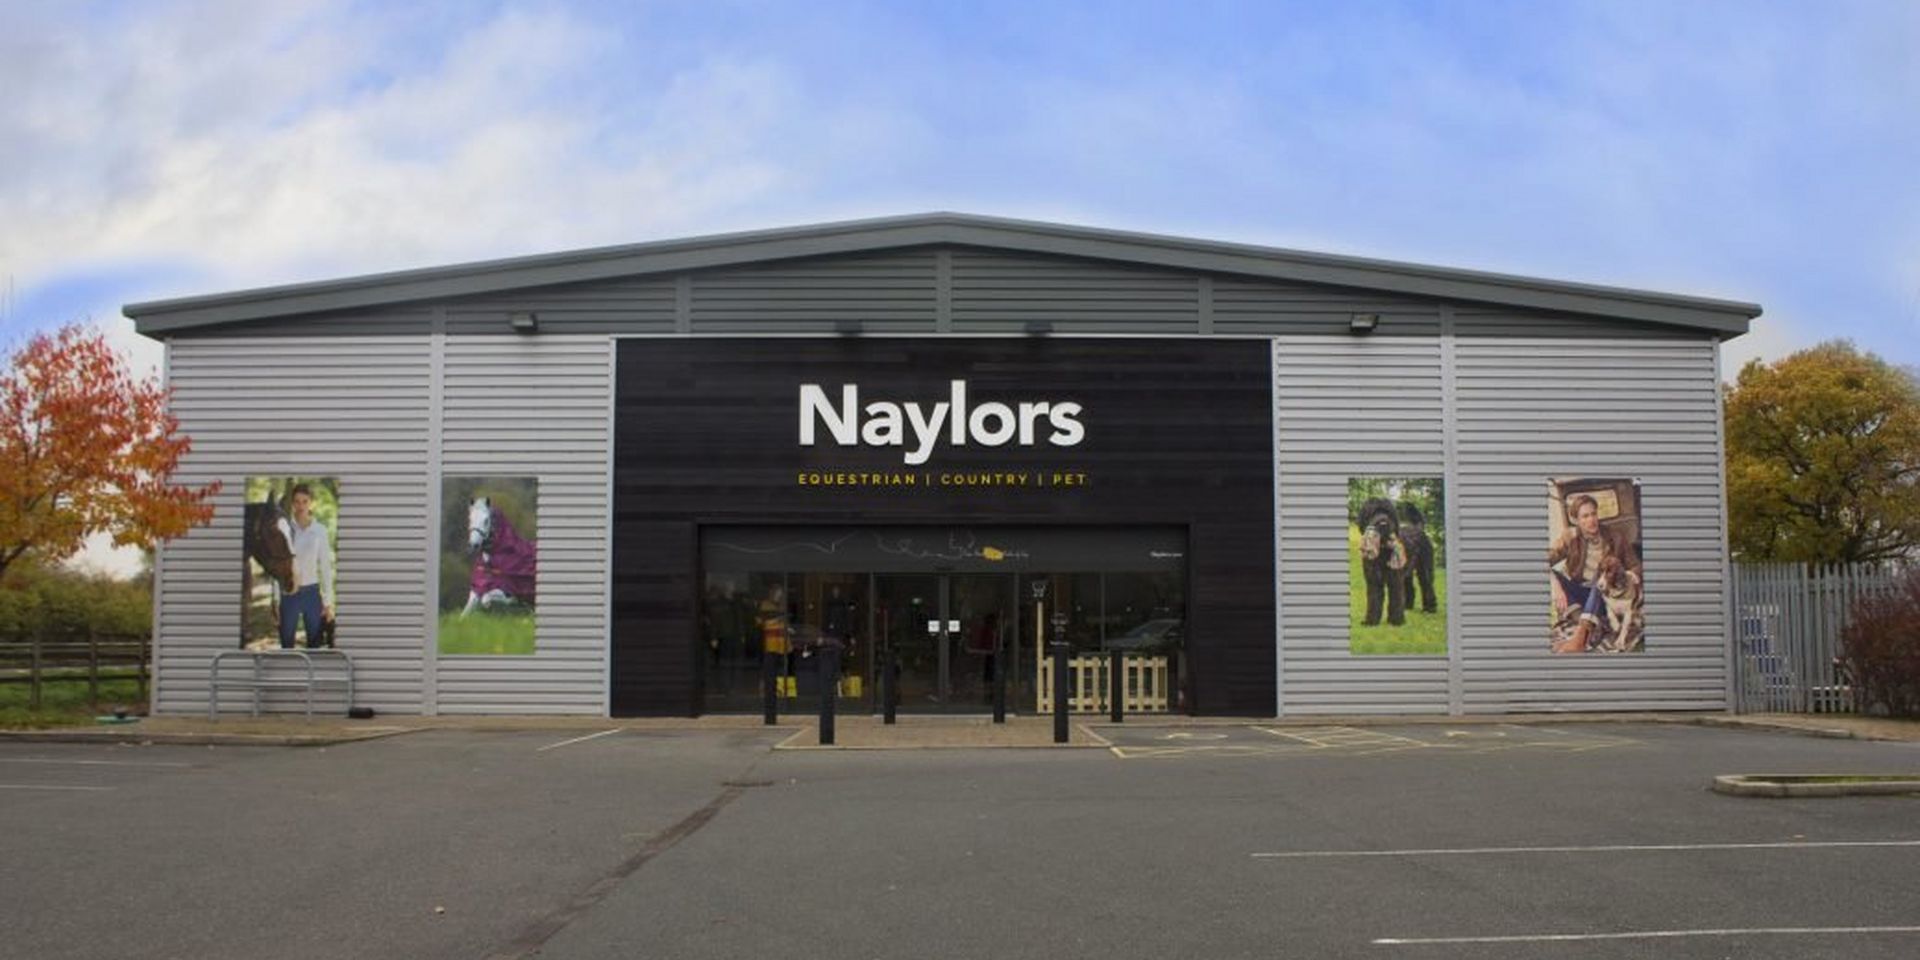 The Naylors Nantwich Store Has A Whole New Look